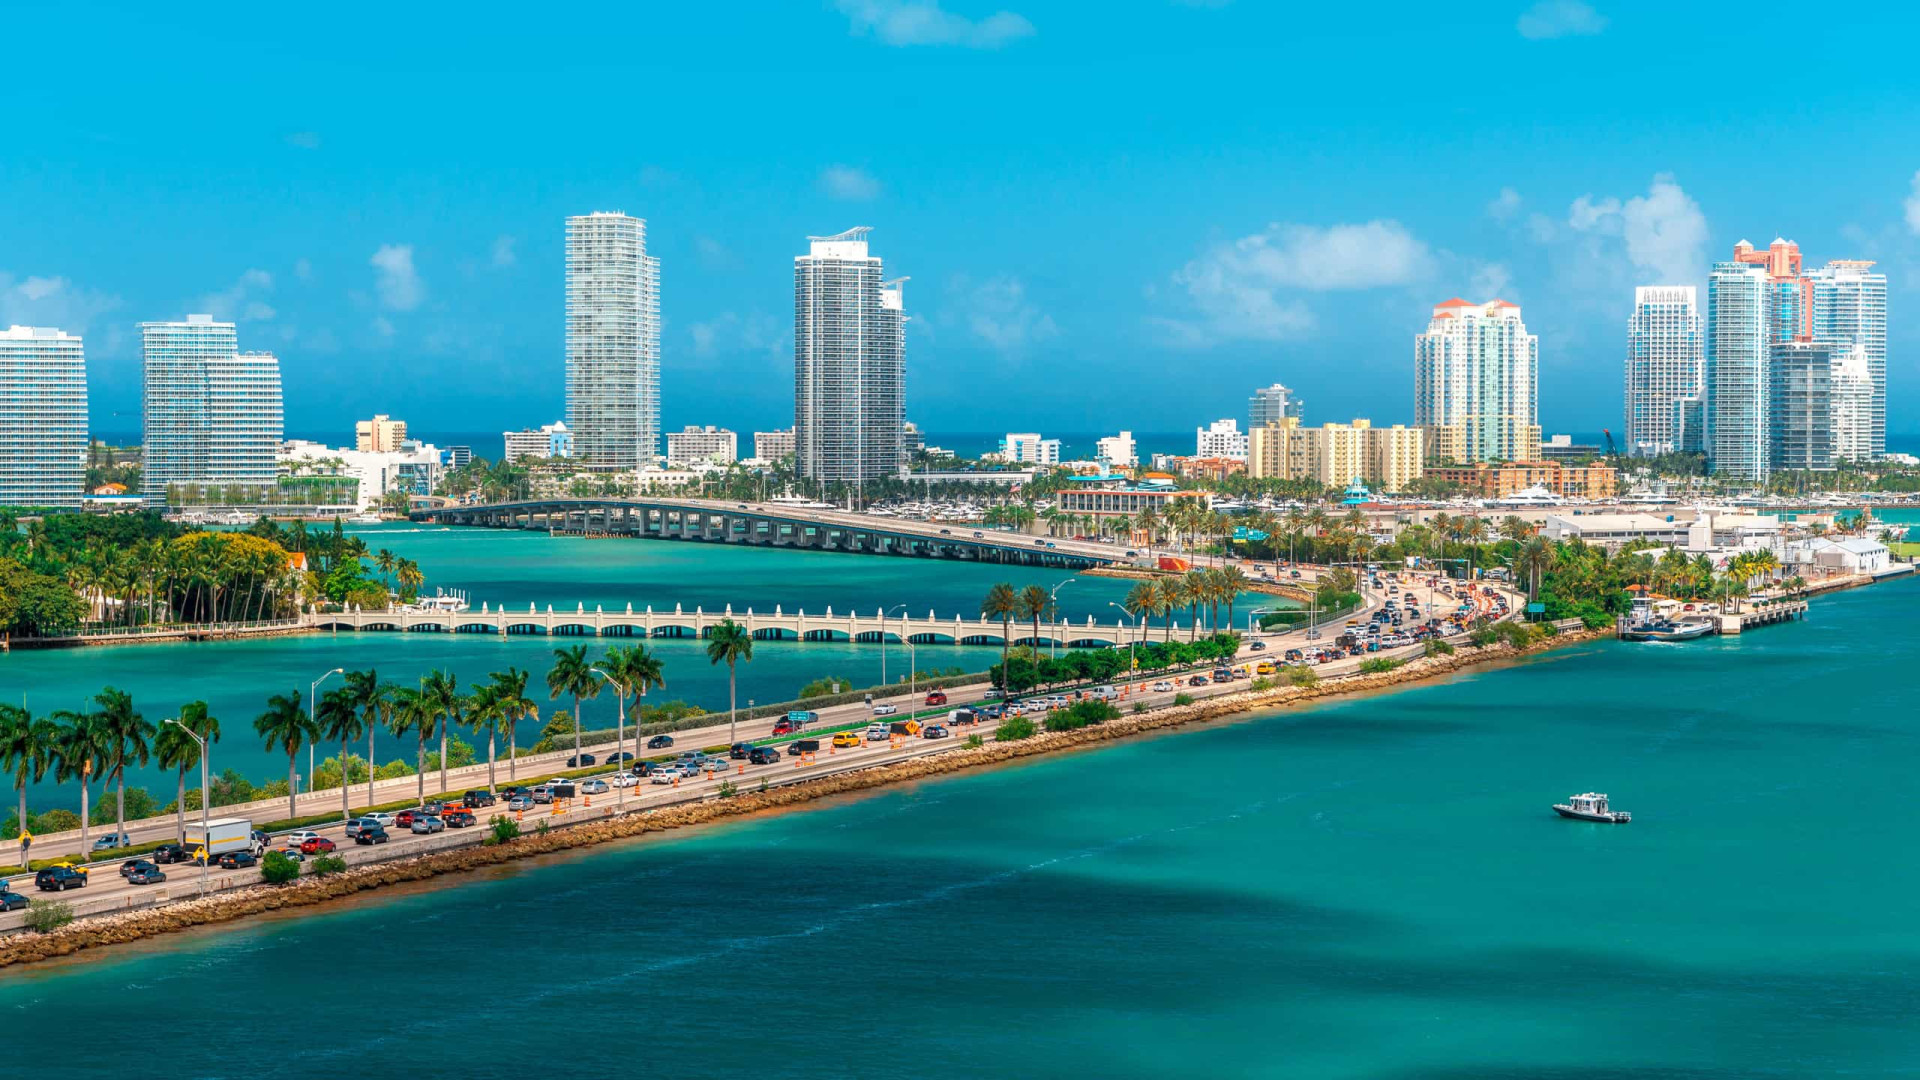 <p>And here is another city in Florida that appears on this list. The coastal metropolis of Miami is the second-most visited city in the US after New York City. We can see why, since it boasts warm weather, beaches, and an impressive skyline.</p><p>You may also like:<a href="https://www.starsinsider.com/n/380903?utm_source=msn.com&utm_medium=display&utm_campaign=referral_description&utm_content=700885en-us"> What you don't know about Benedict Cumberbatch</a></p>